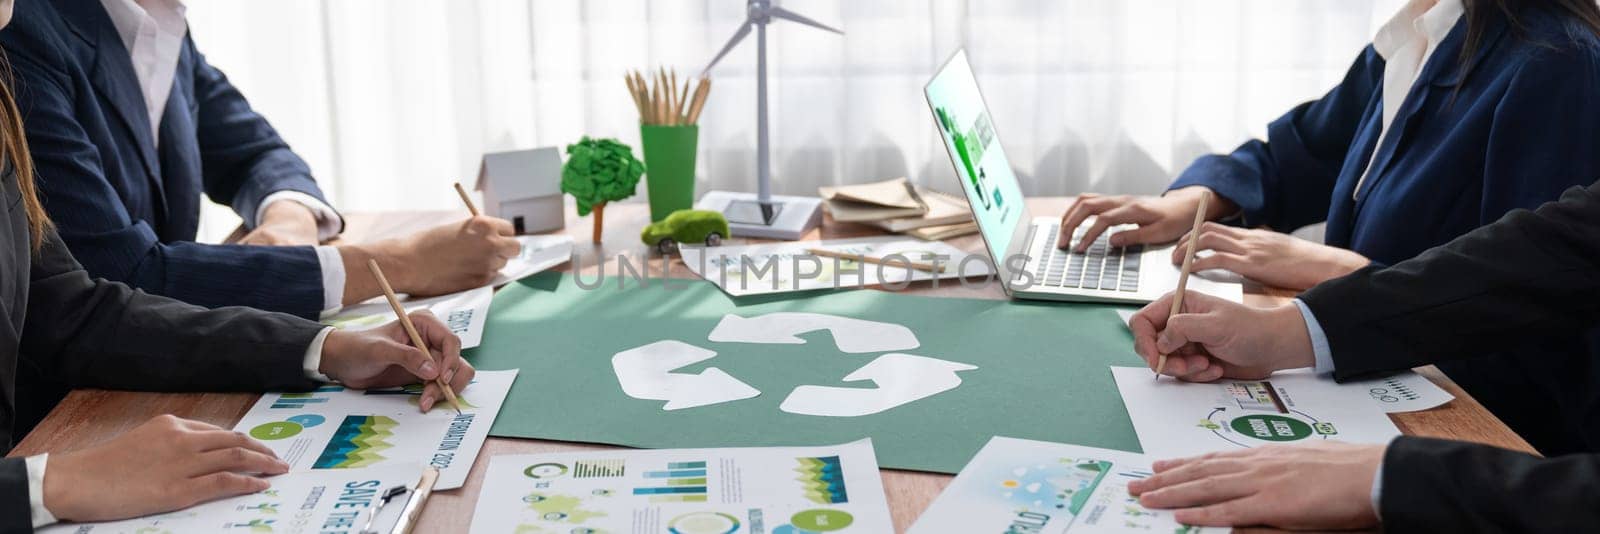 Group of business people planning and discussing on recycle symbol.Trailblazing by biancoblue